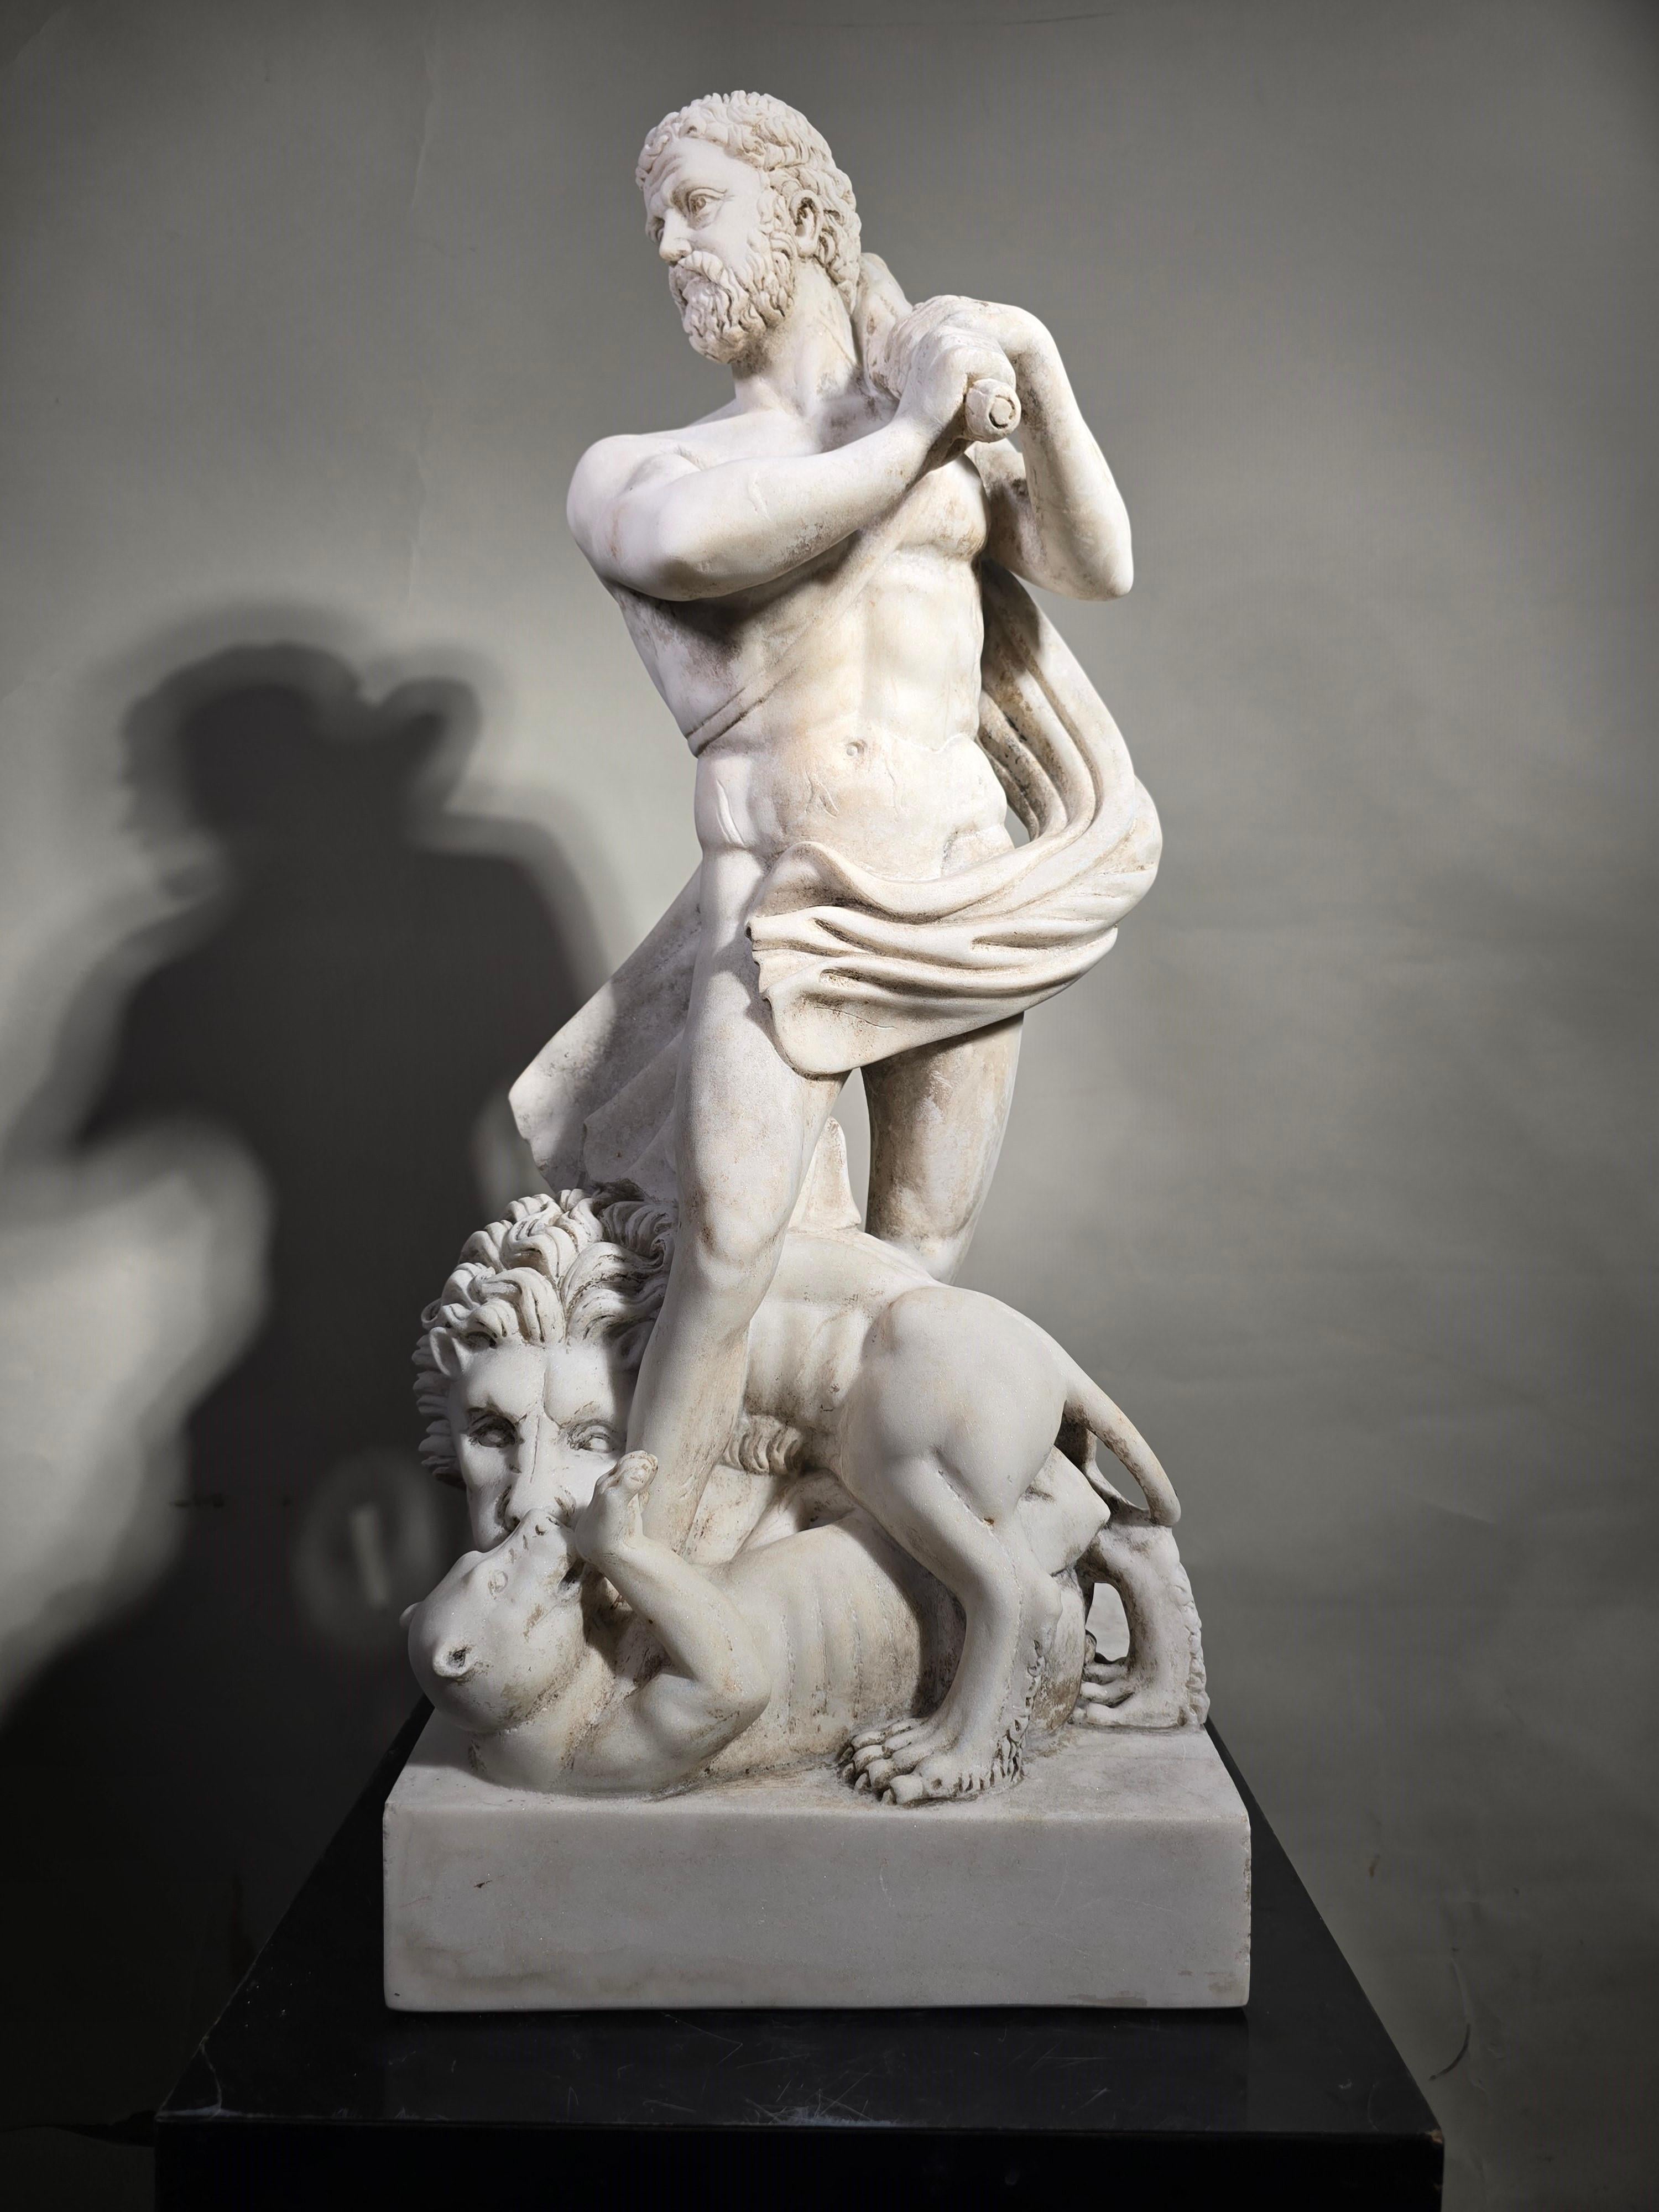 This majestic Carrara marble sculpture, depicting the heroic figure of Hercules, is a unique 19th-century work of art. With timeless elegance and meticulous execution, this piece offers an impressive combination of beauty and